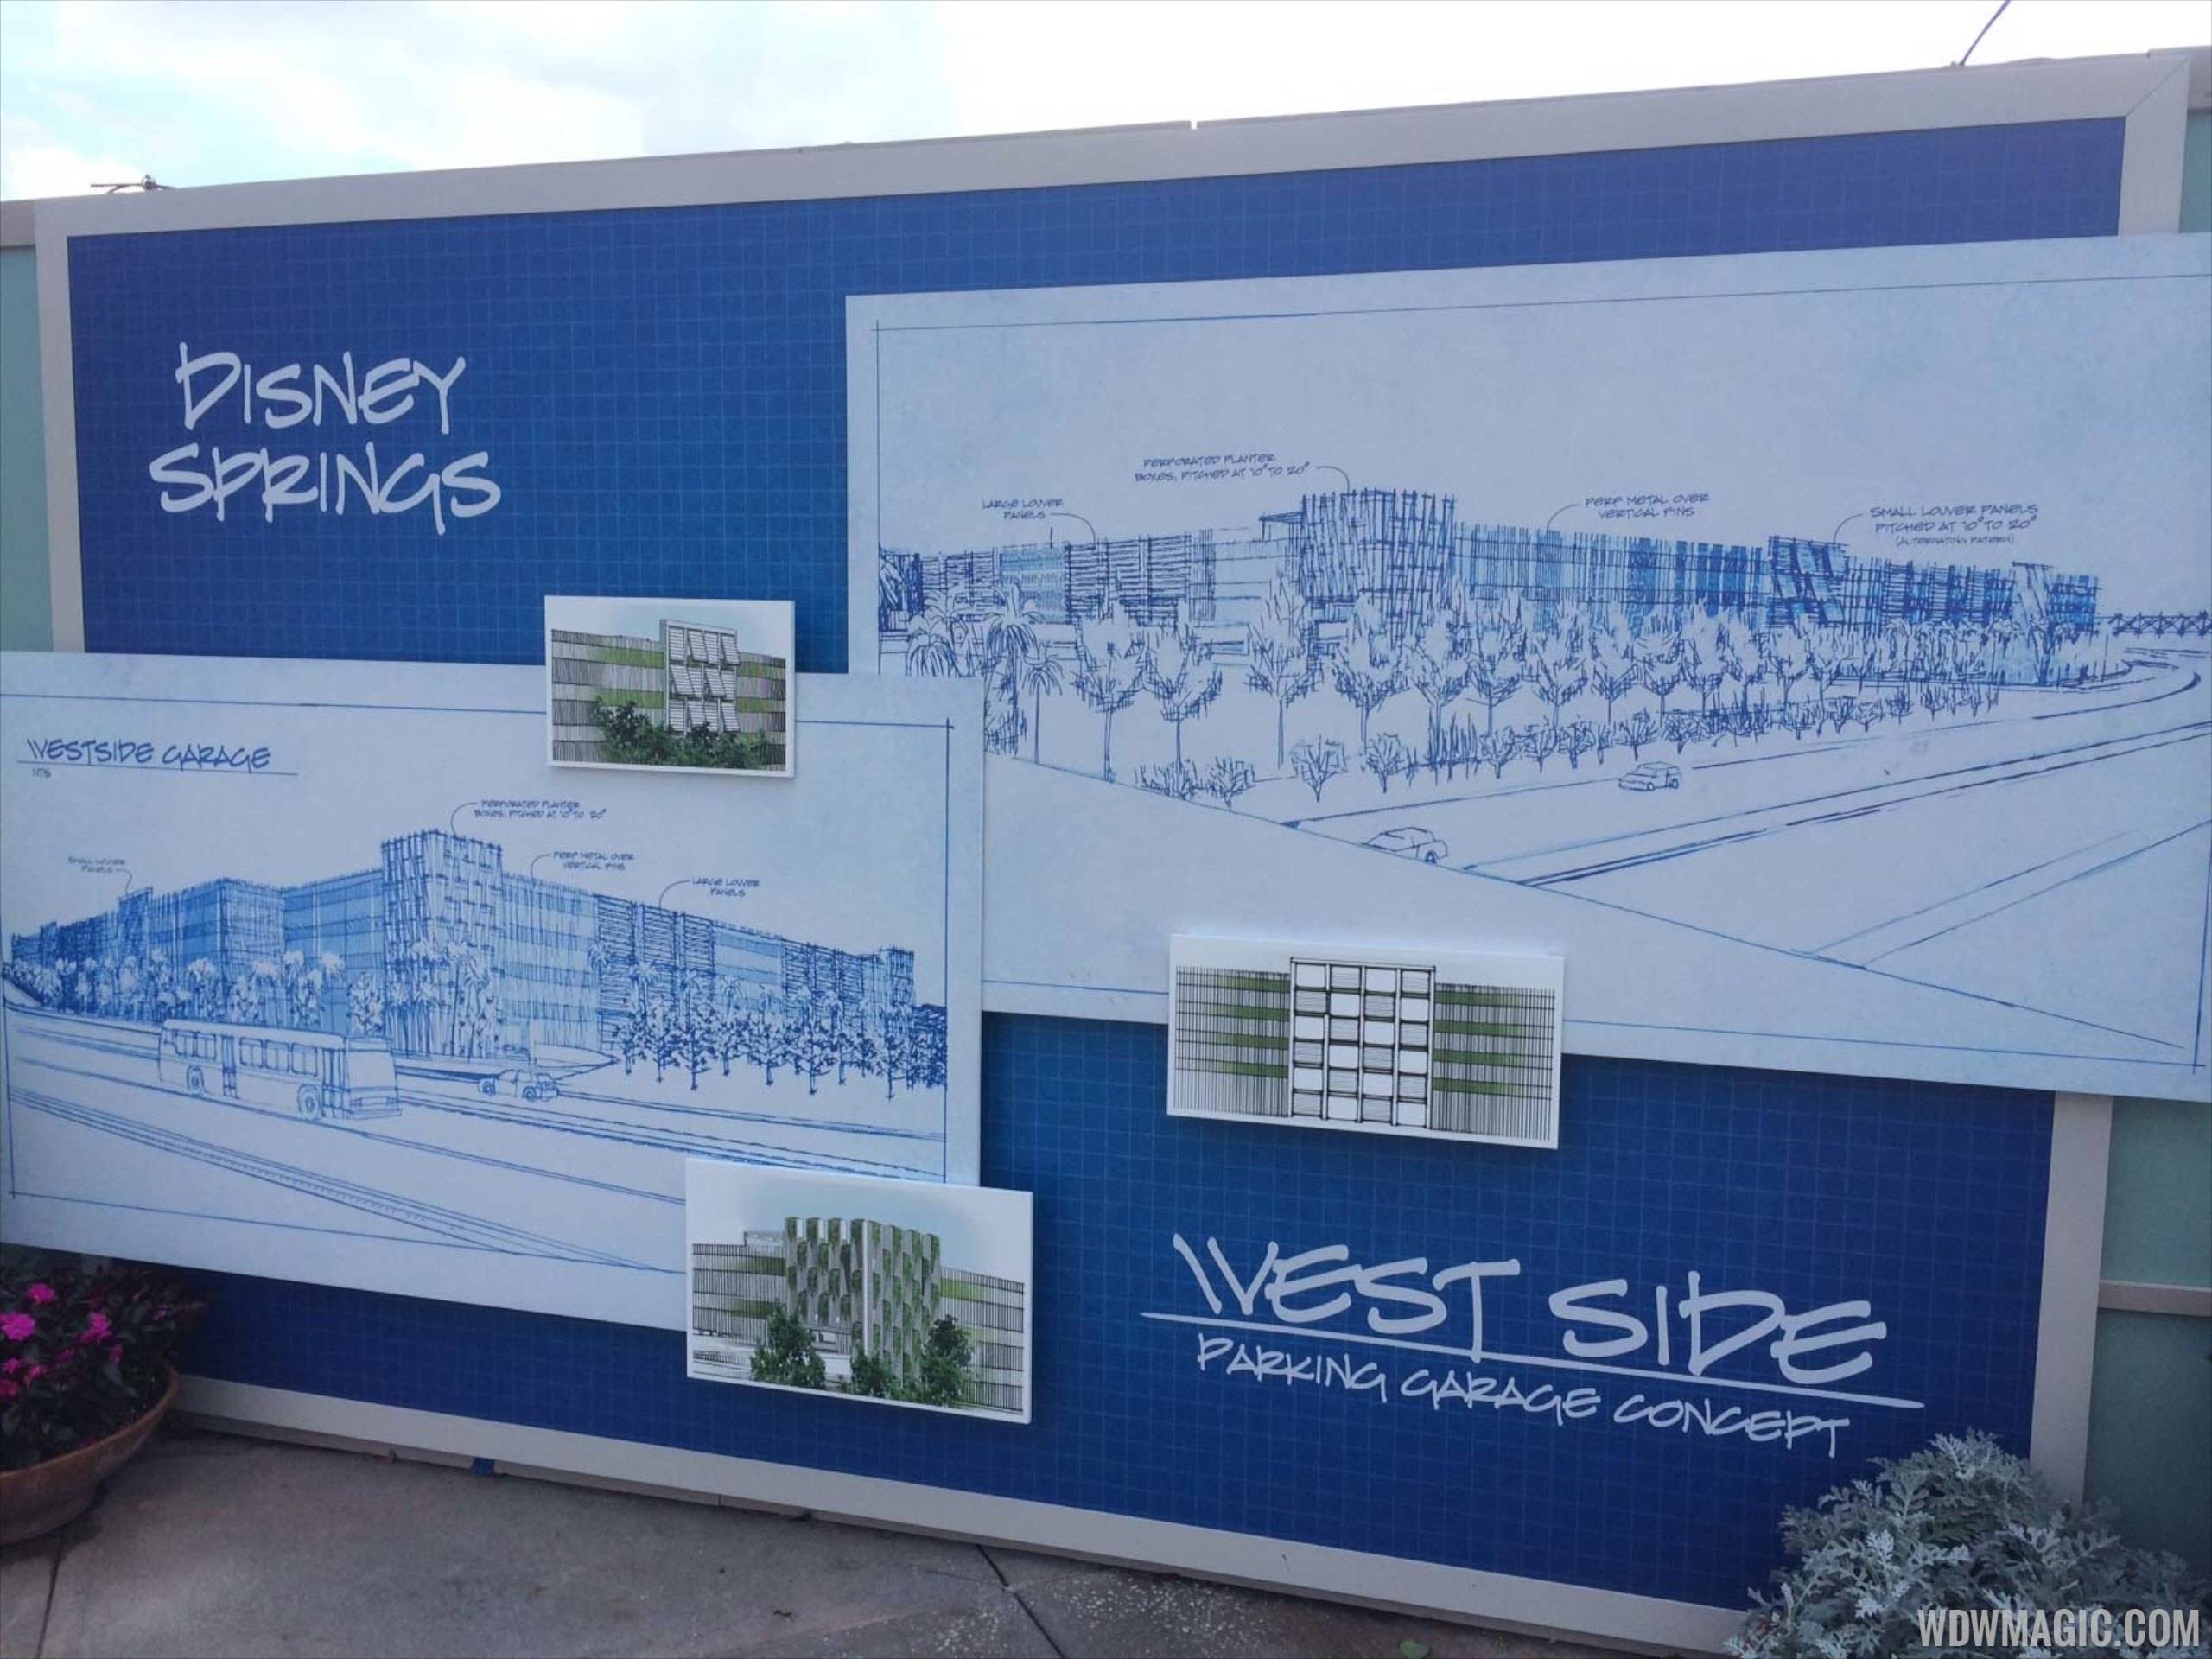 PHOTOS - First look at Disney Springs West Side Parking Garage concept art